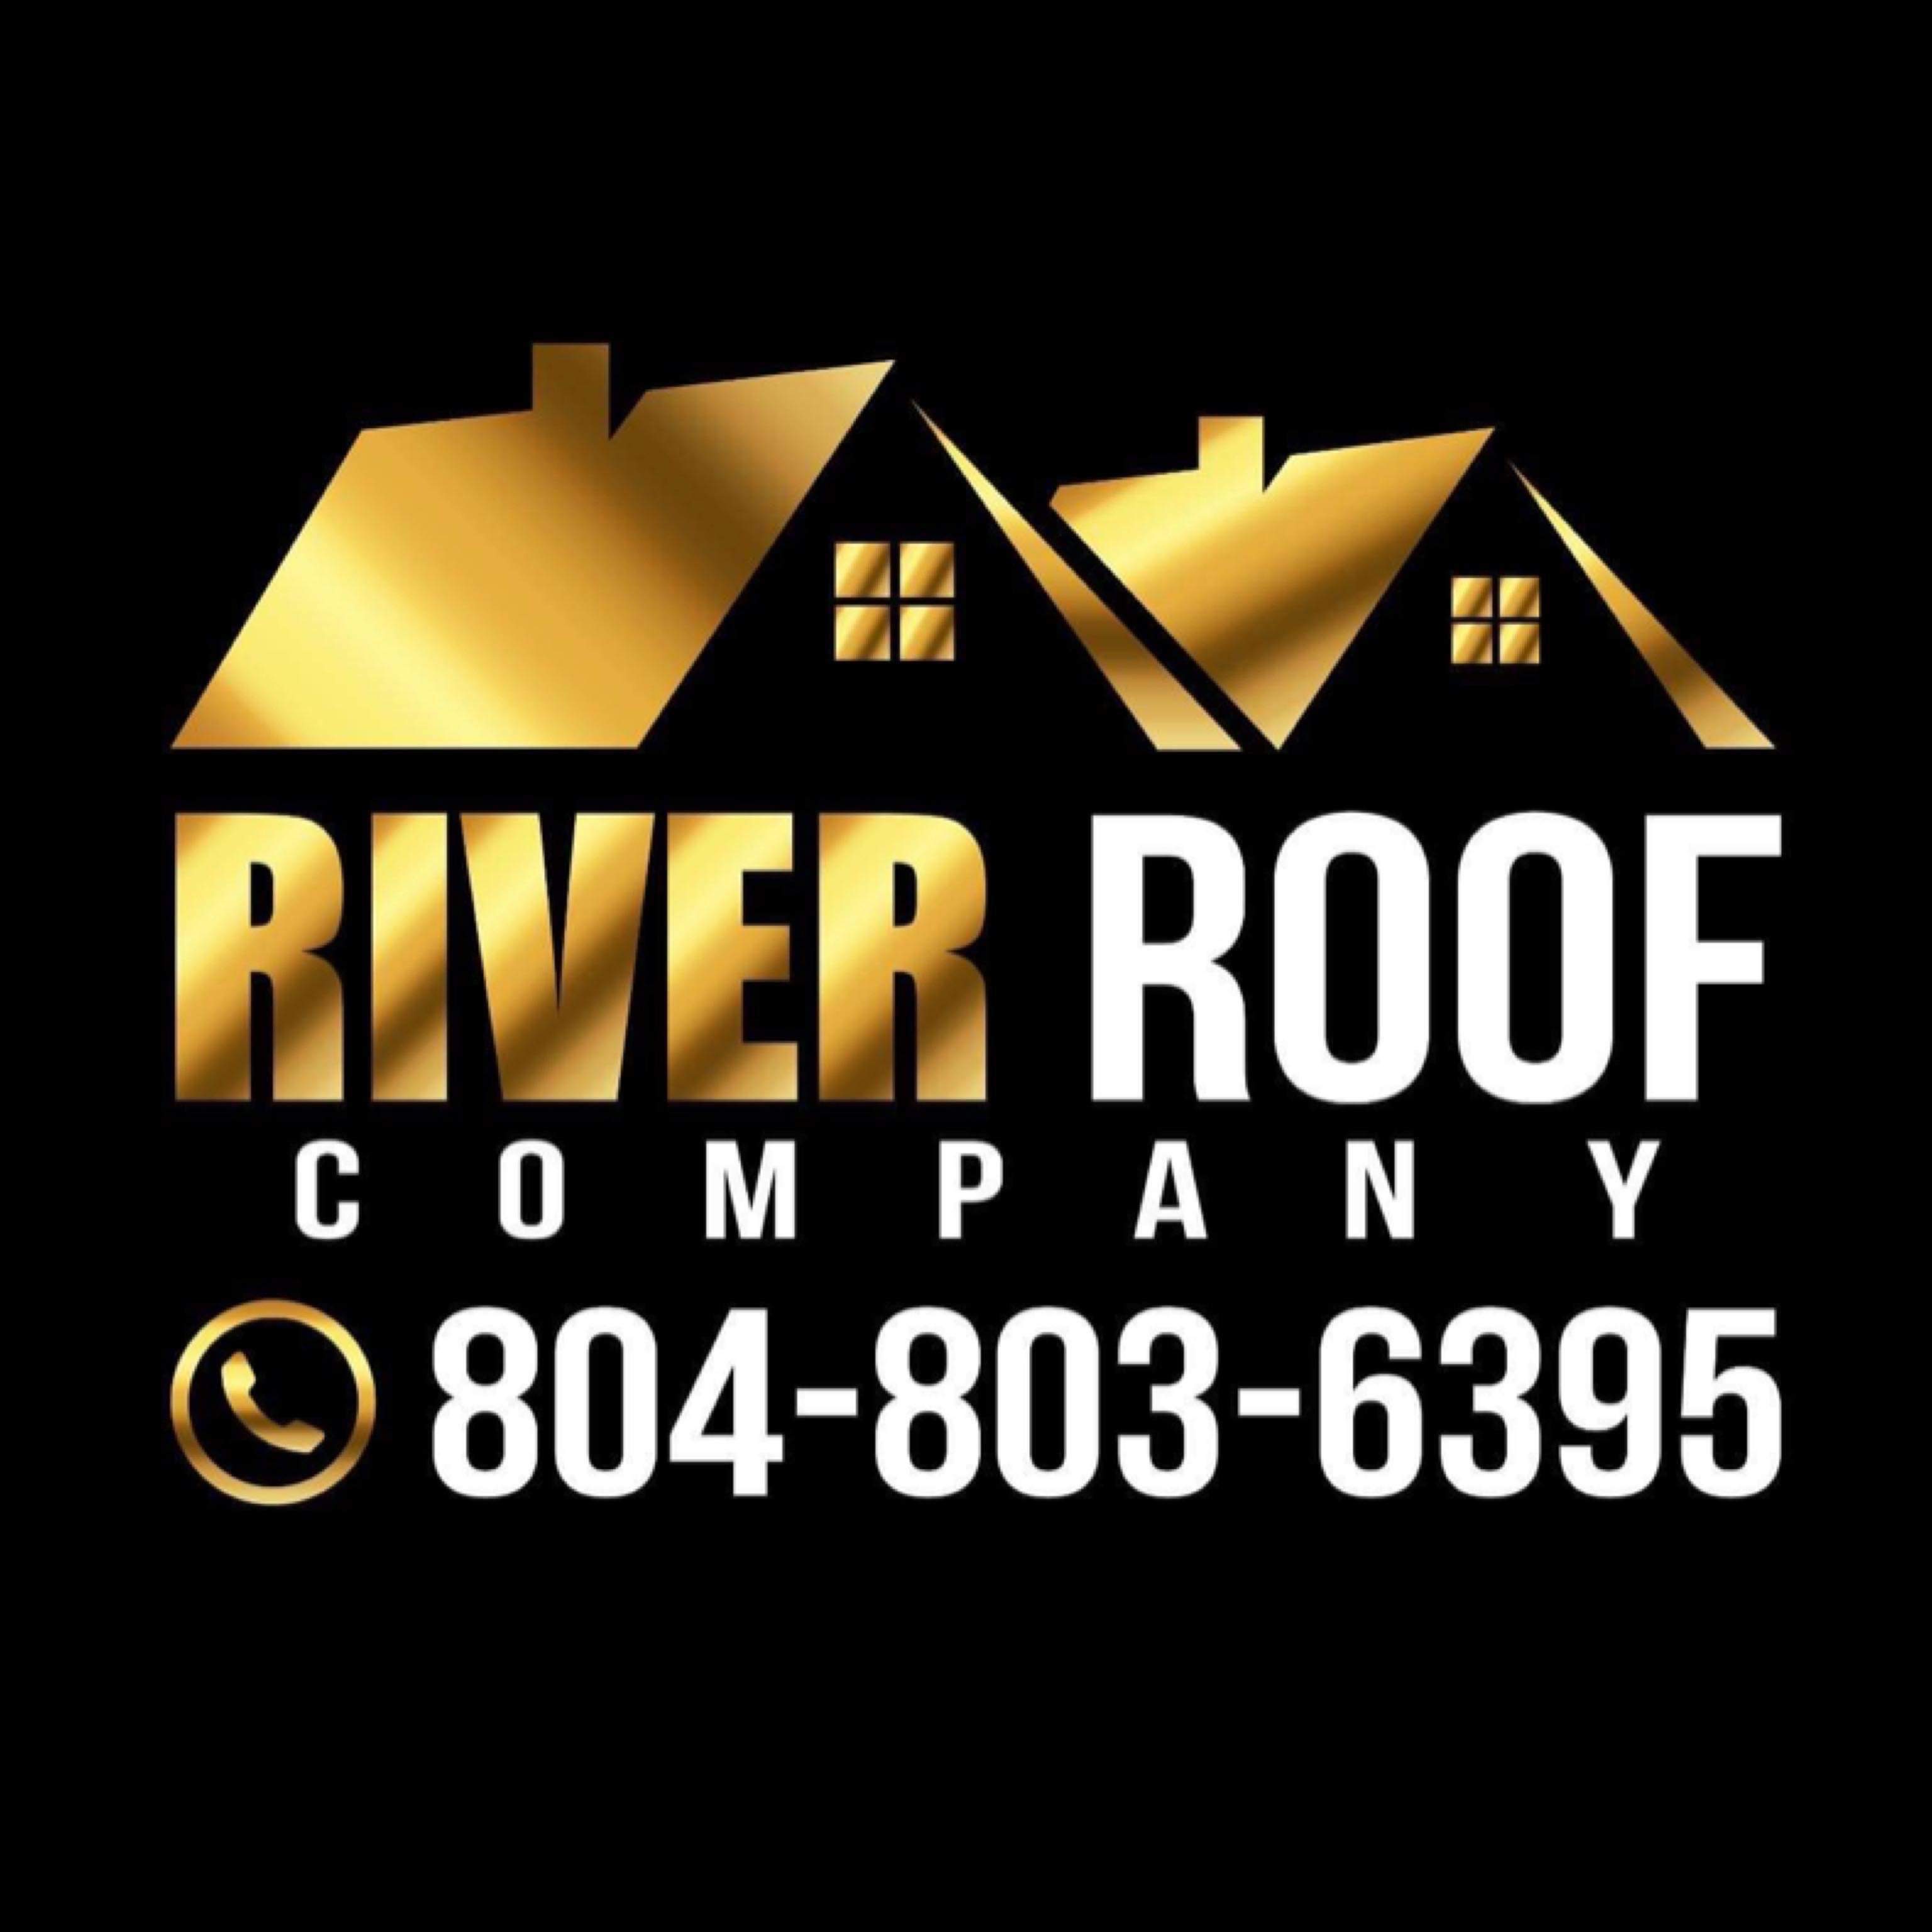 Professional Roofing Services in the Richmond Area